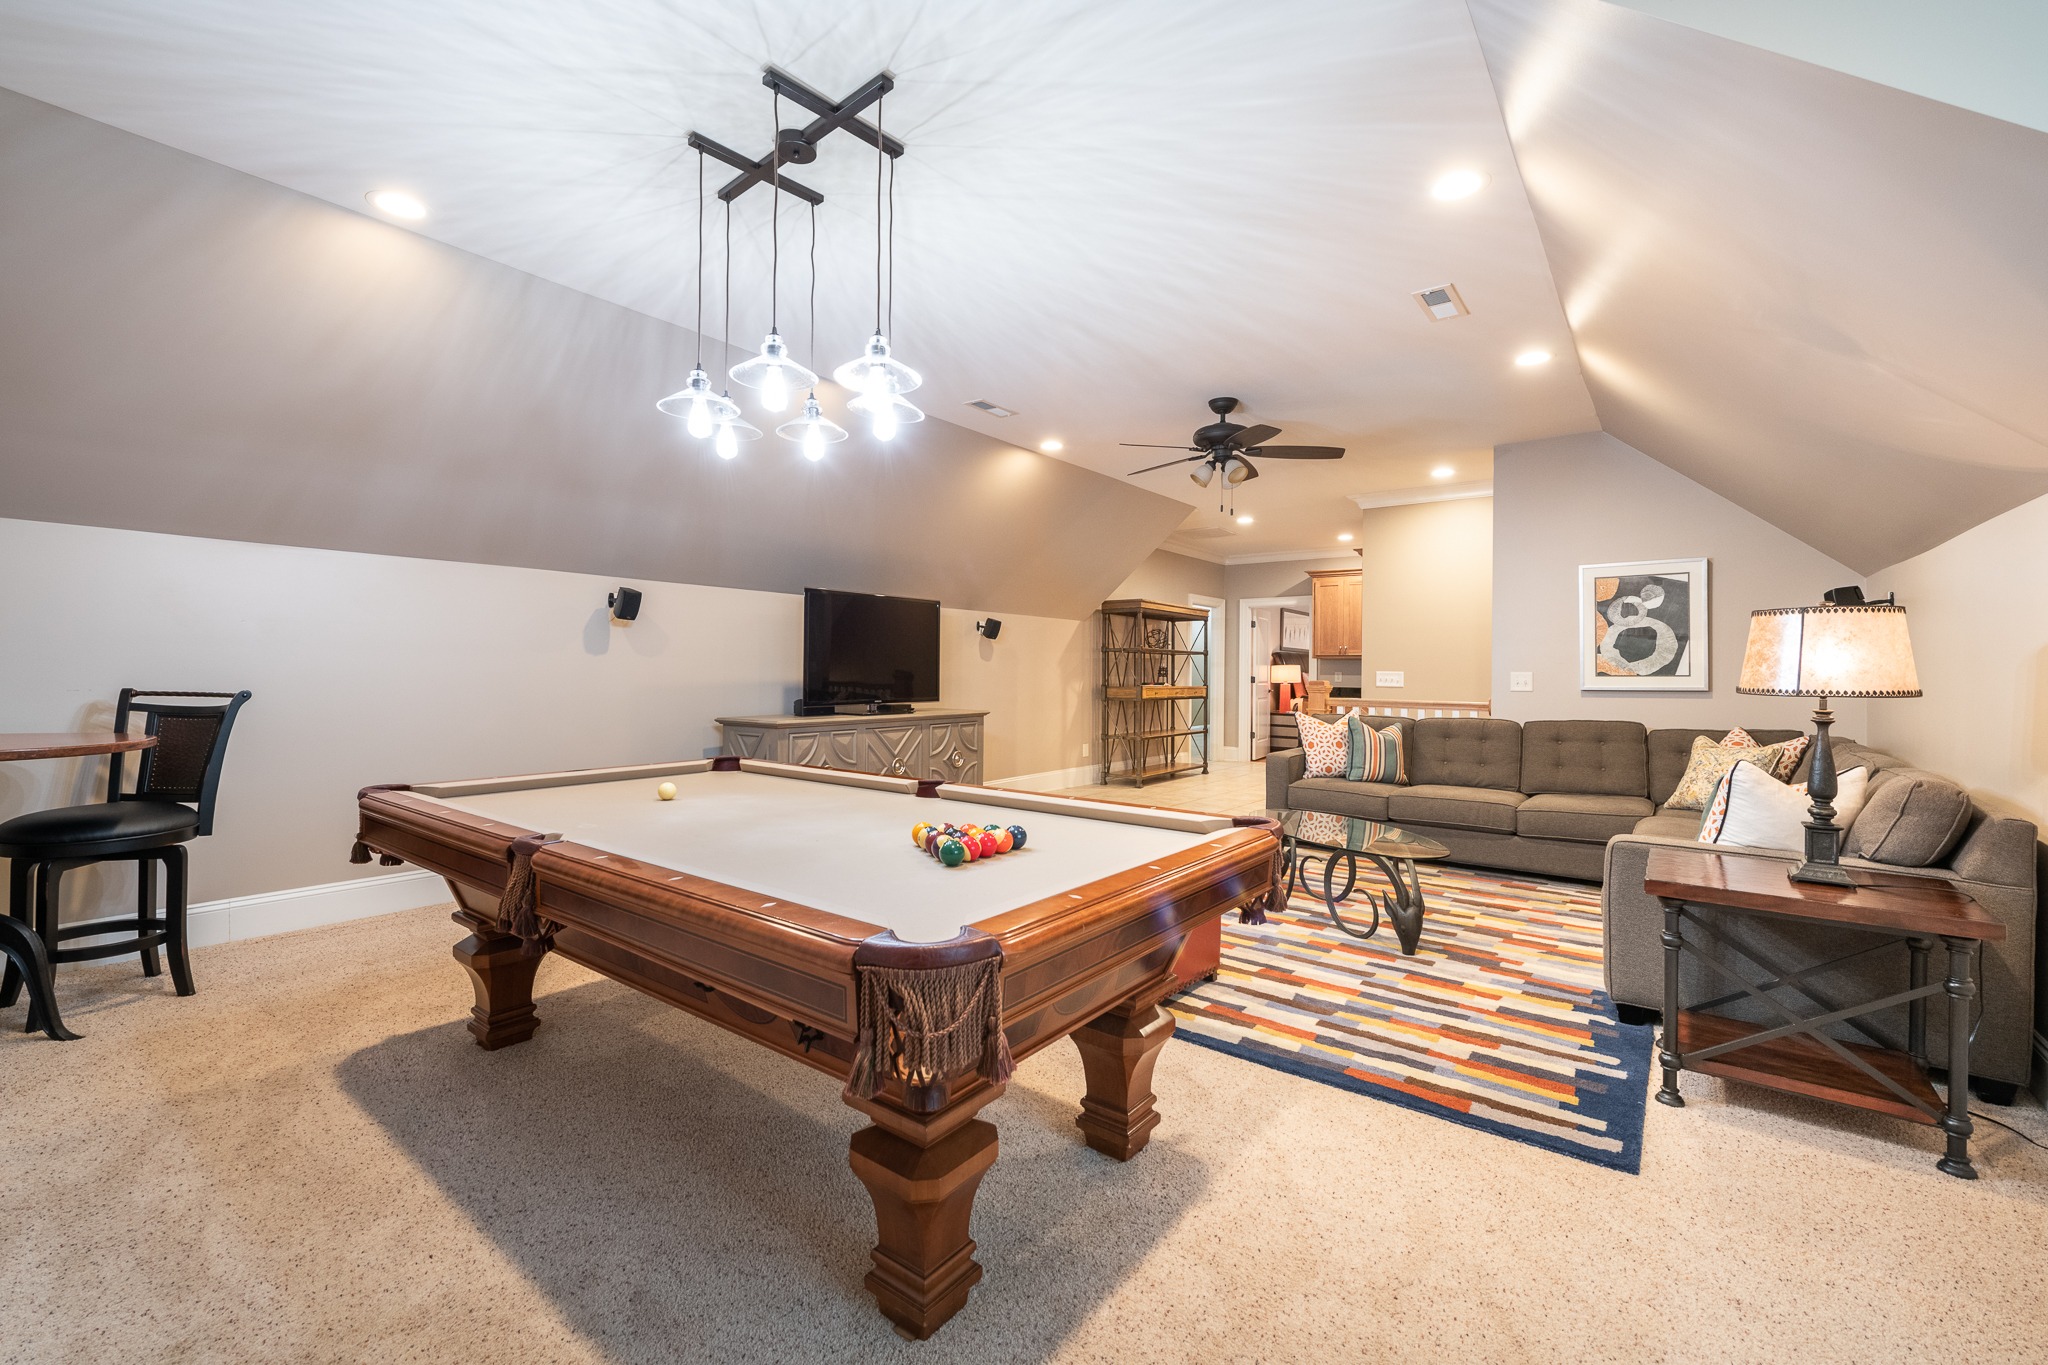 Pool table and ping pong table top to remain